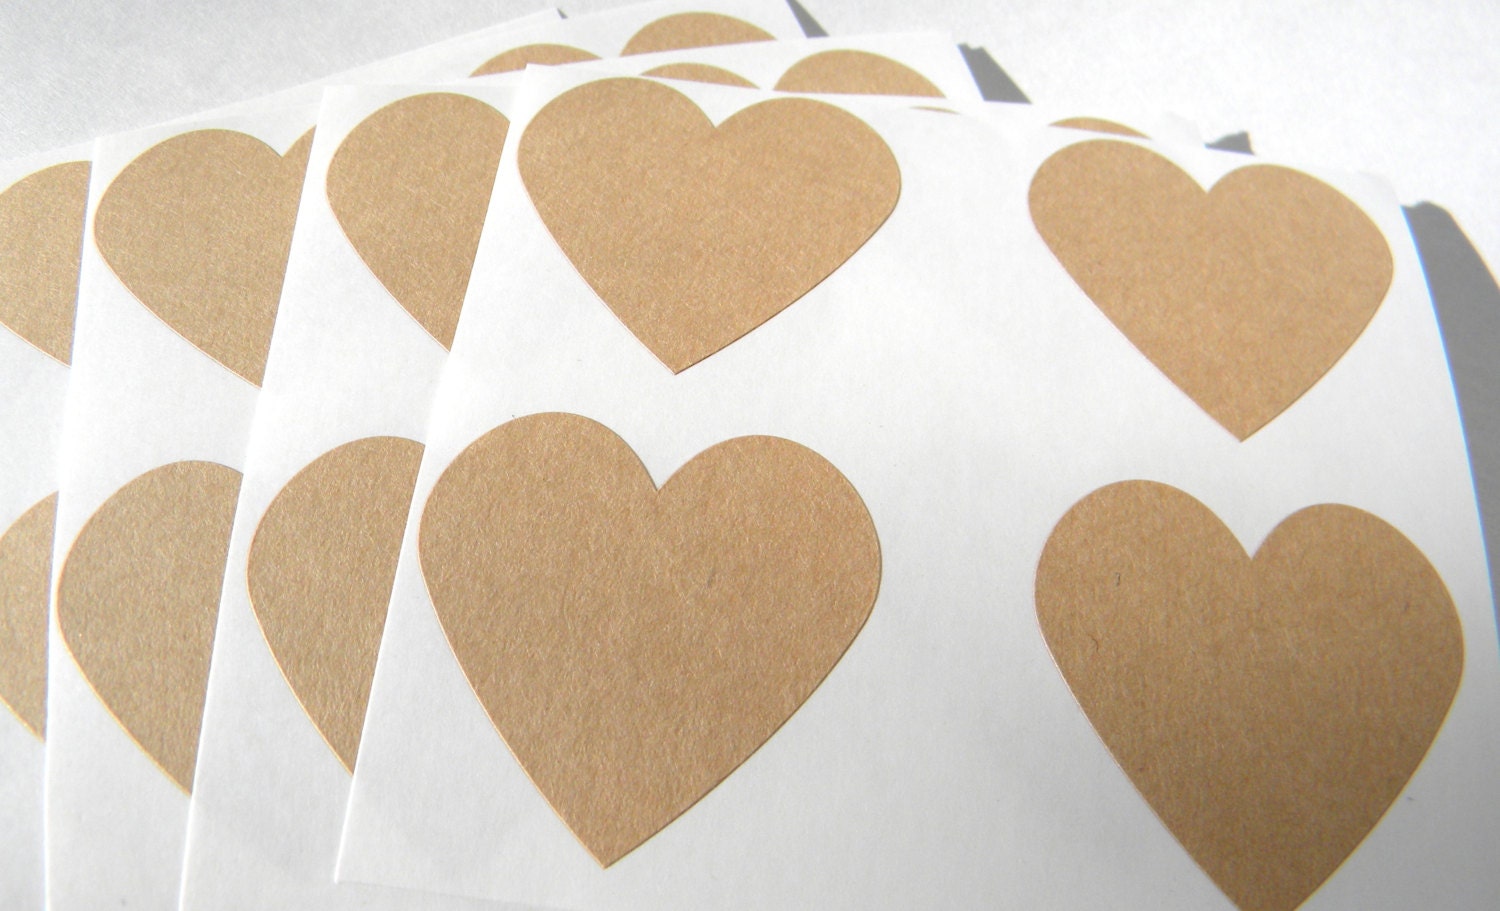 48 Kraft Brown Heart Stickers, 1.5" Heart, Scrapbook Supply, Sationery Supply, Gift Wrapping, Favor Bag Stickers - CMWrapNShipSupply